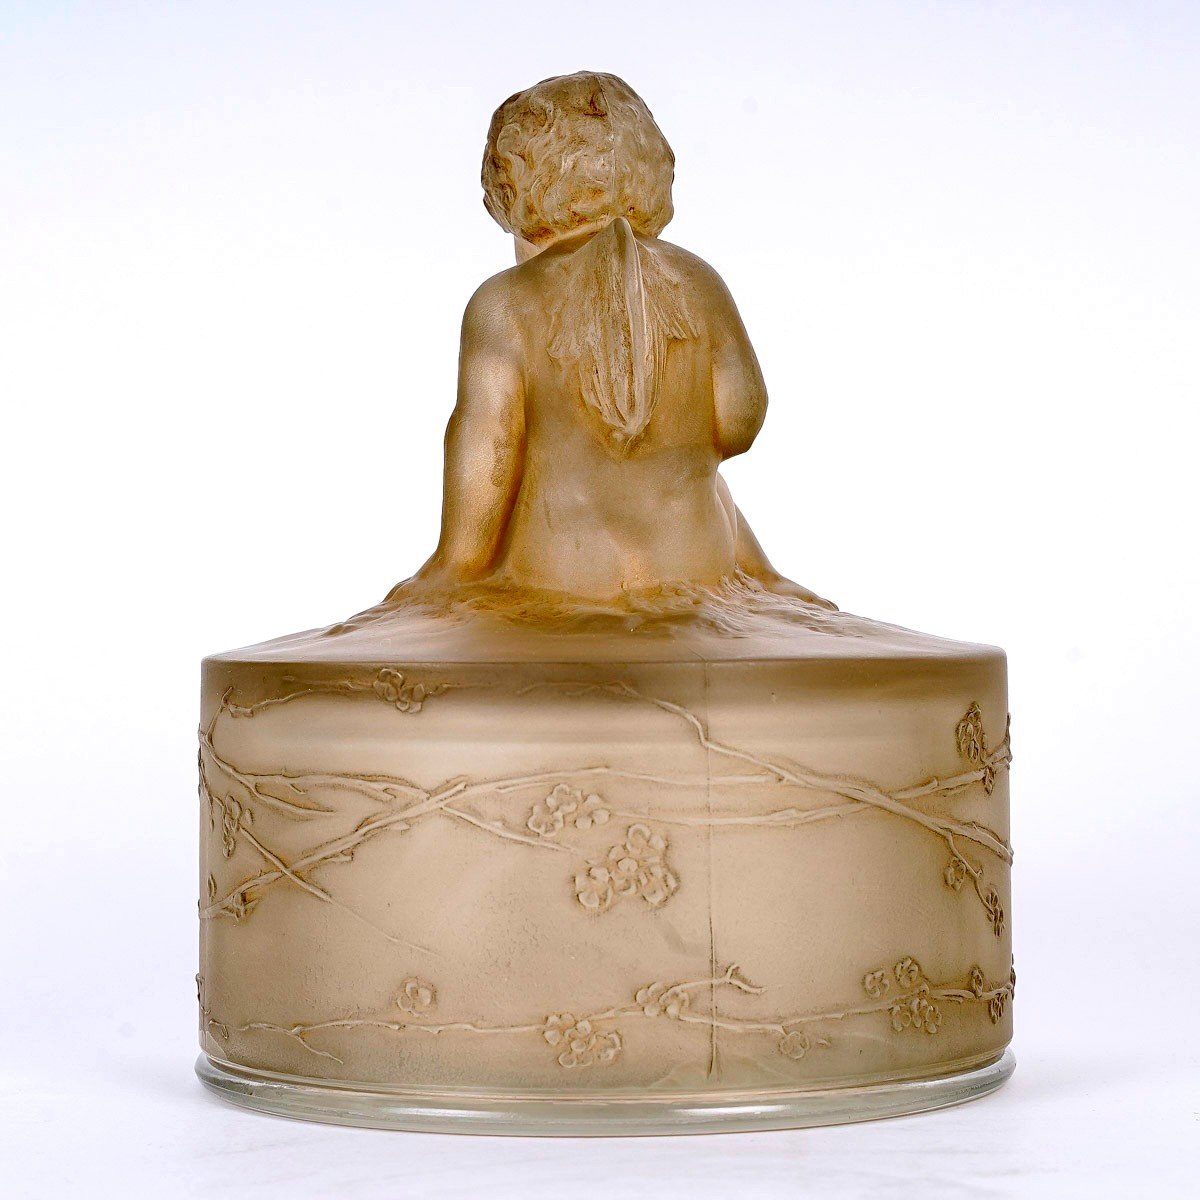 1919 René Lalique - Box Amour Assis Cherub Putti Frosted Glass With Sepia Patina-photo-3